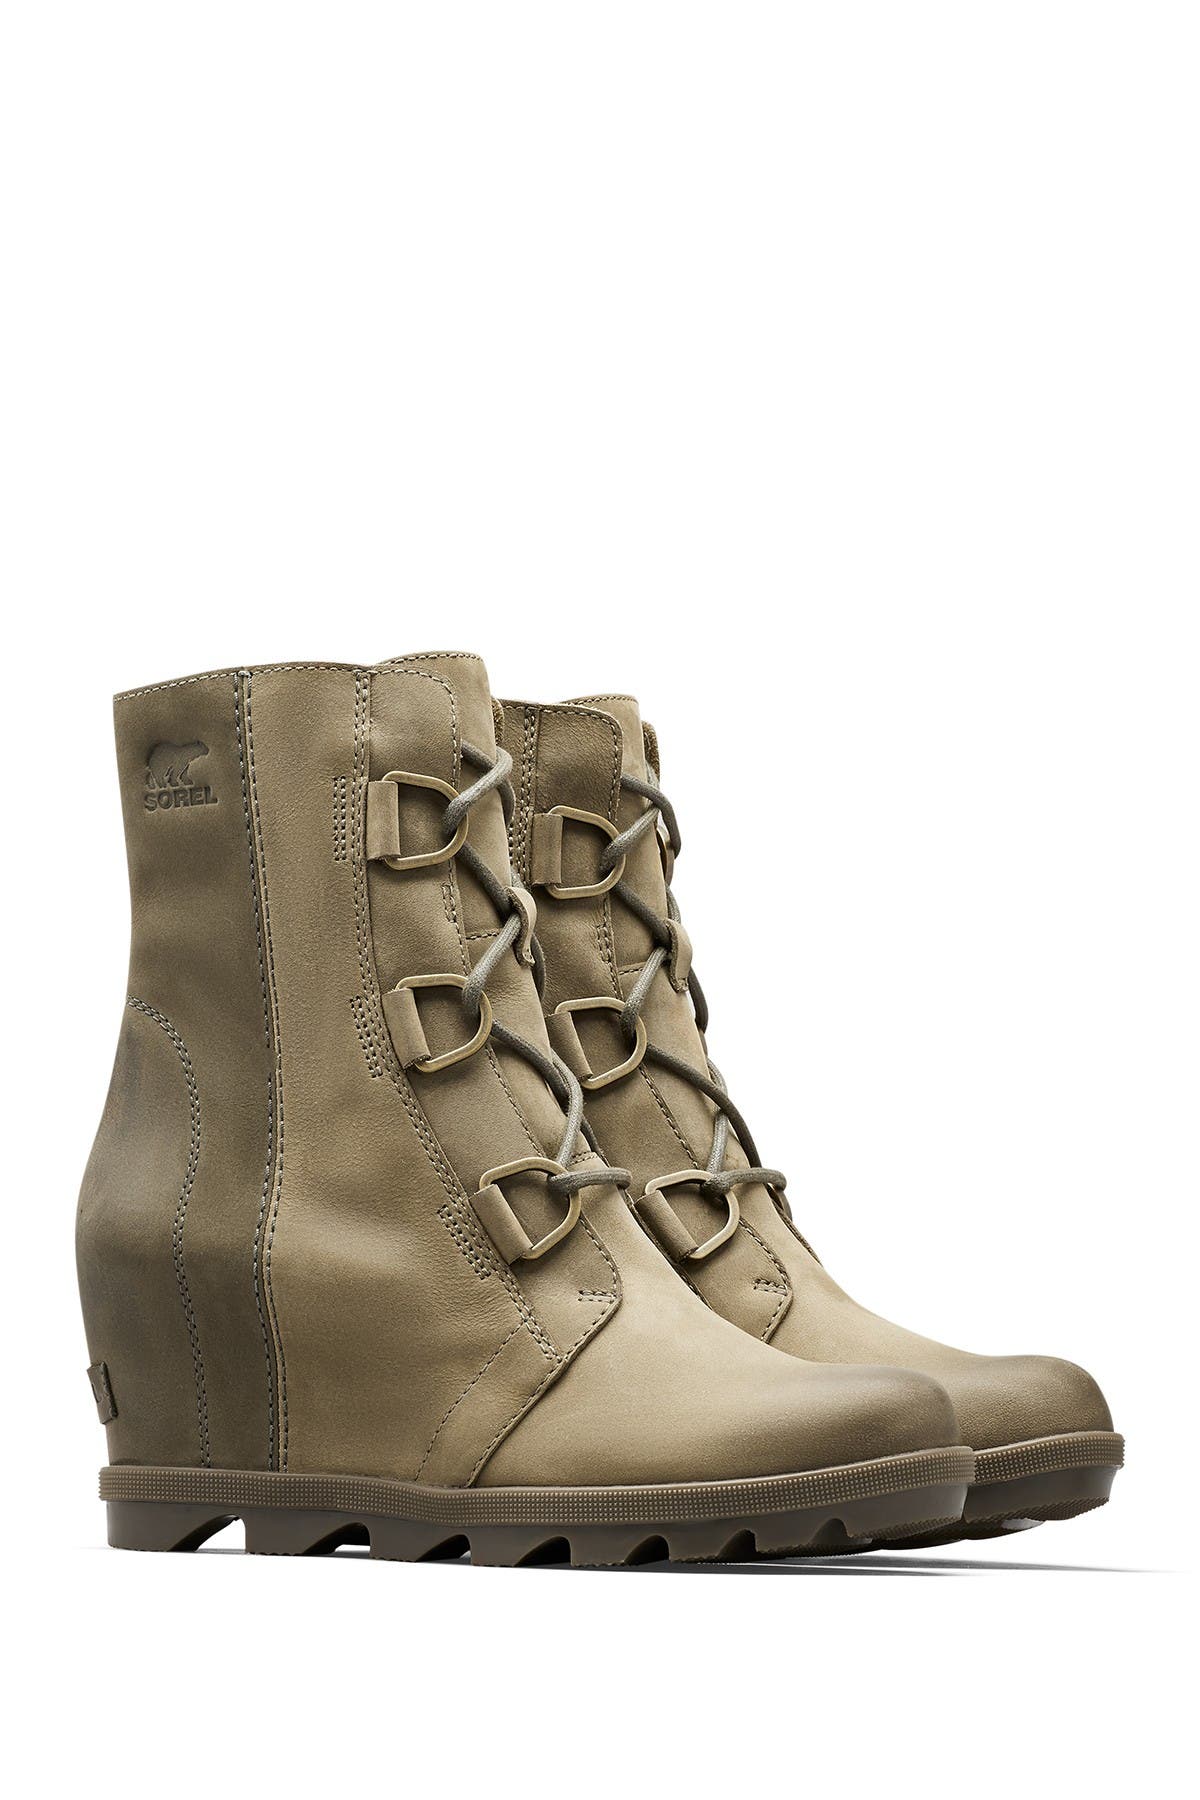 womens snow boots clearance